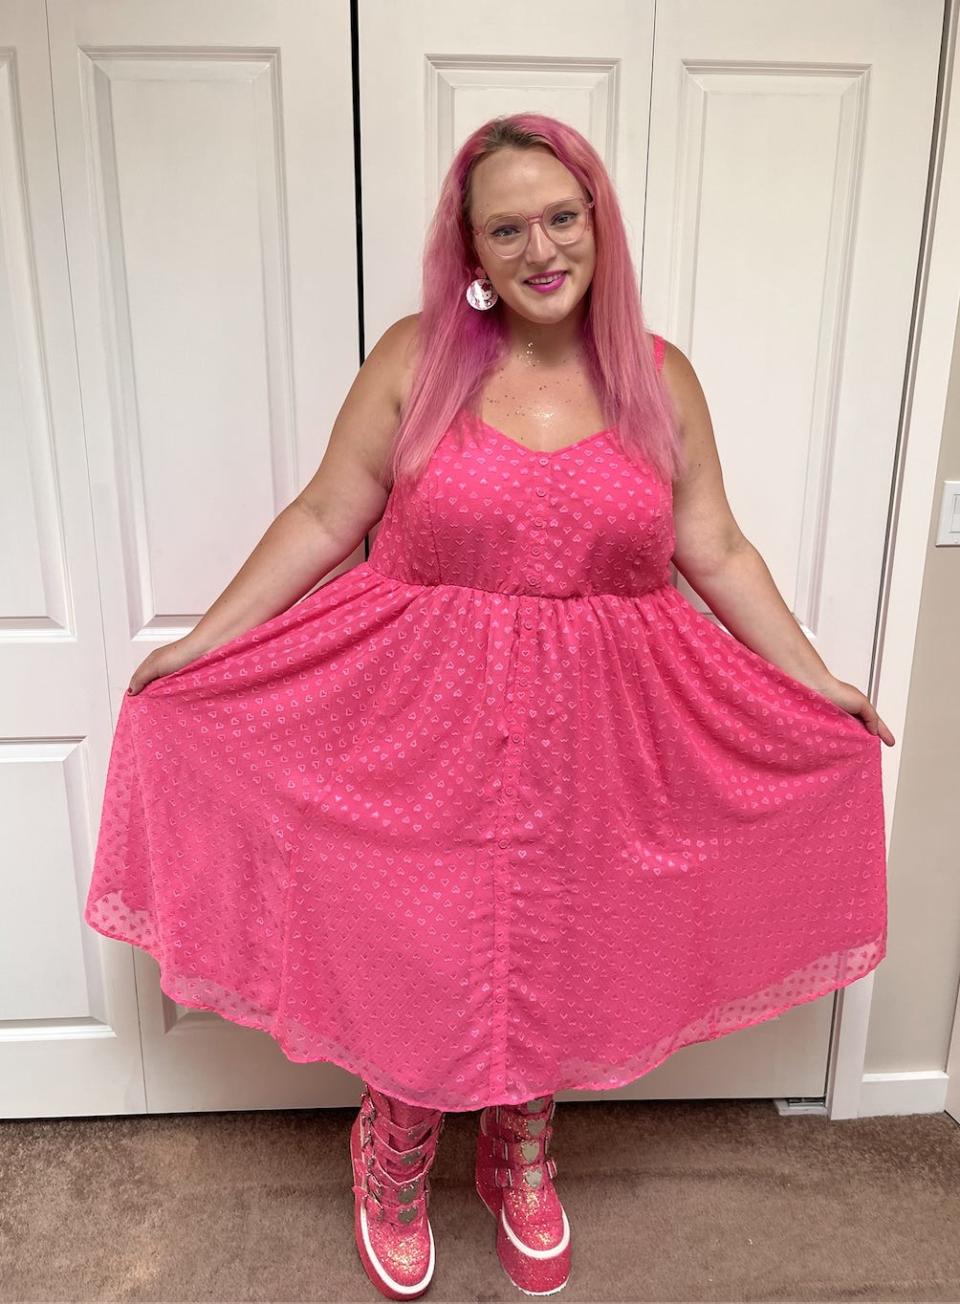 The writer wearing a hot pink dress with glittery pink platform shoes